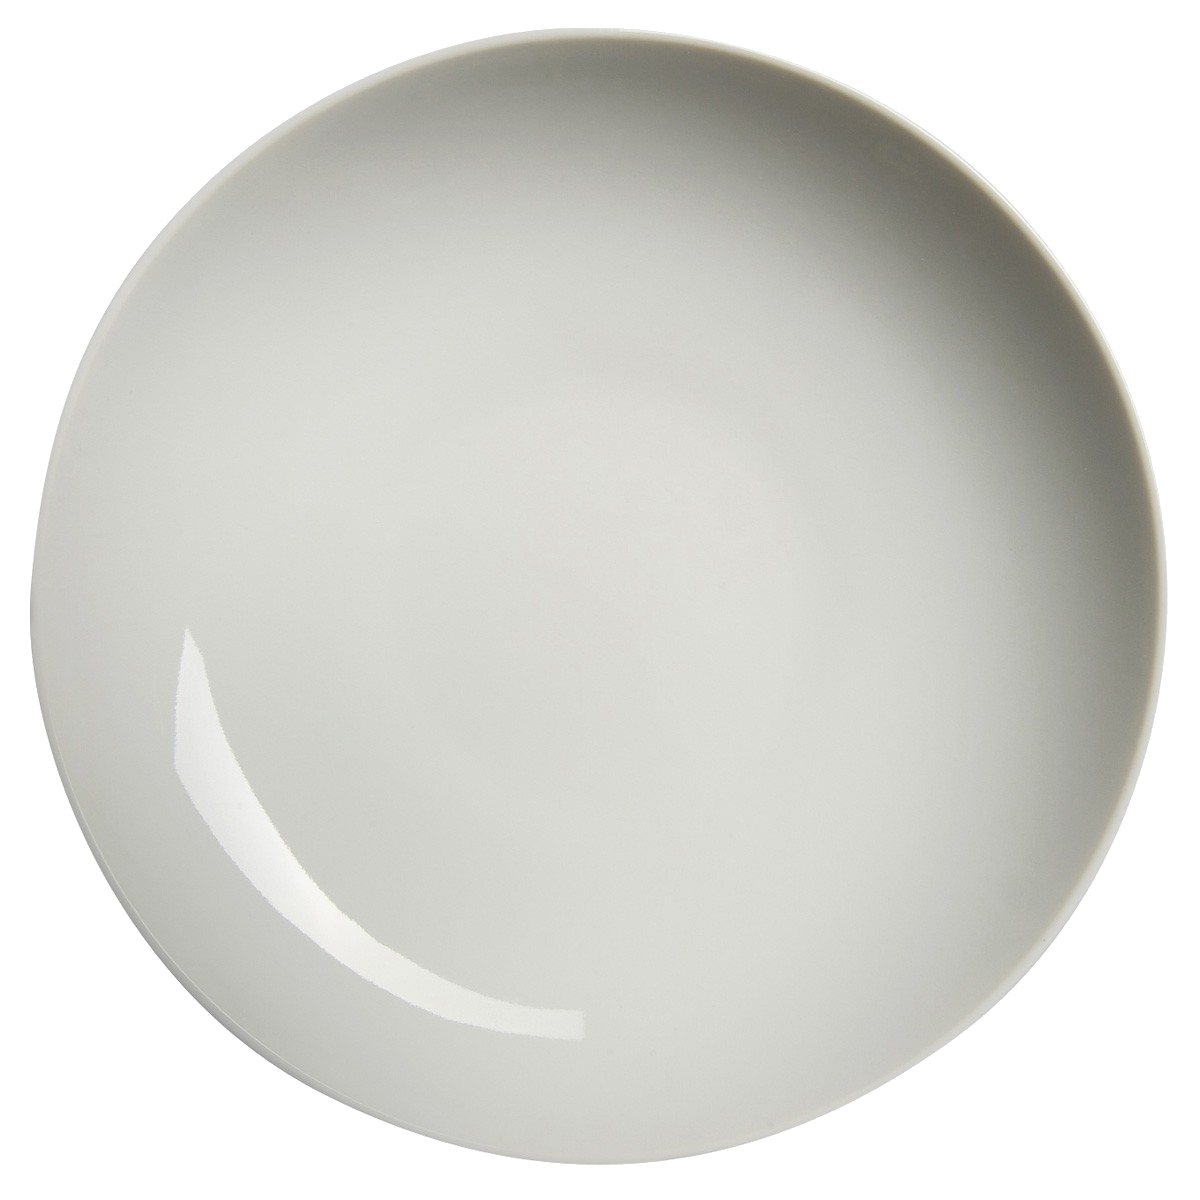 Plate PNG - 3182